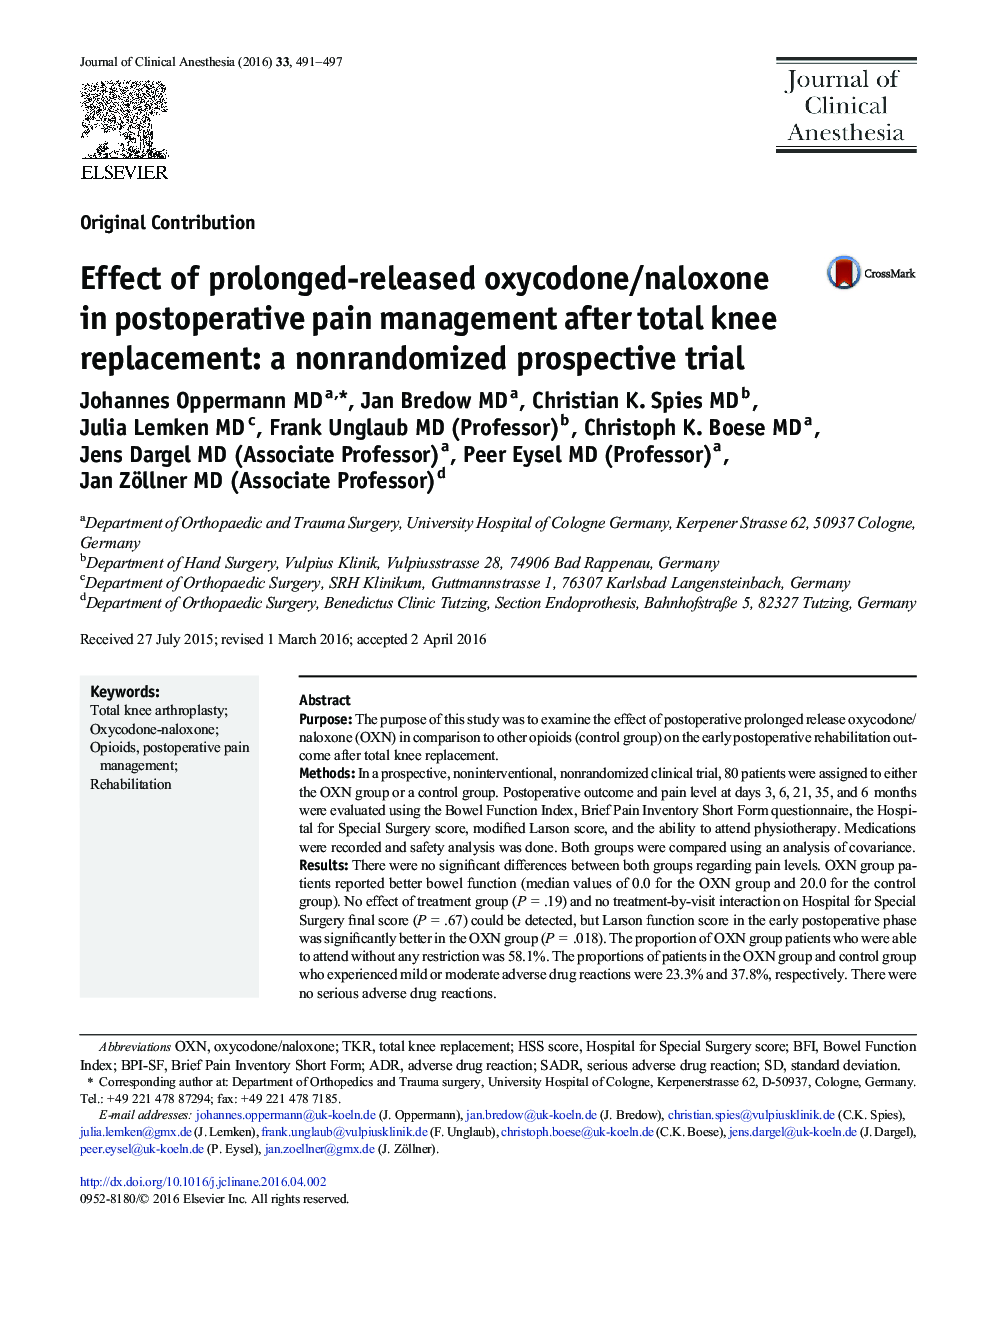 Effect of prolonged-released oxycodone/naloxone in postoperative pain management after total knee replacement: a nonrandomized prospective trial